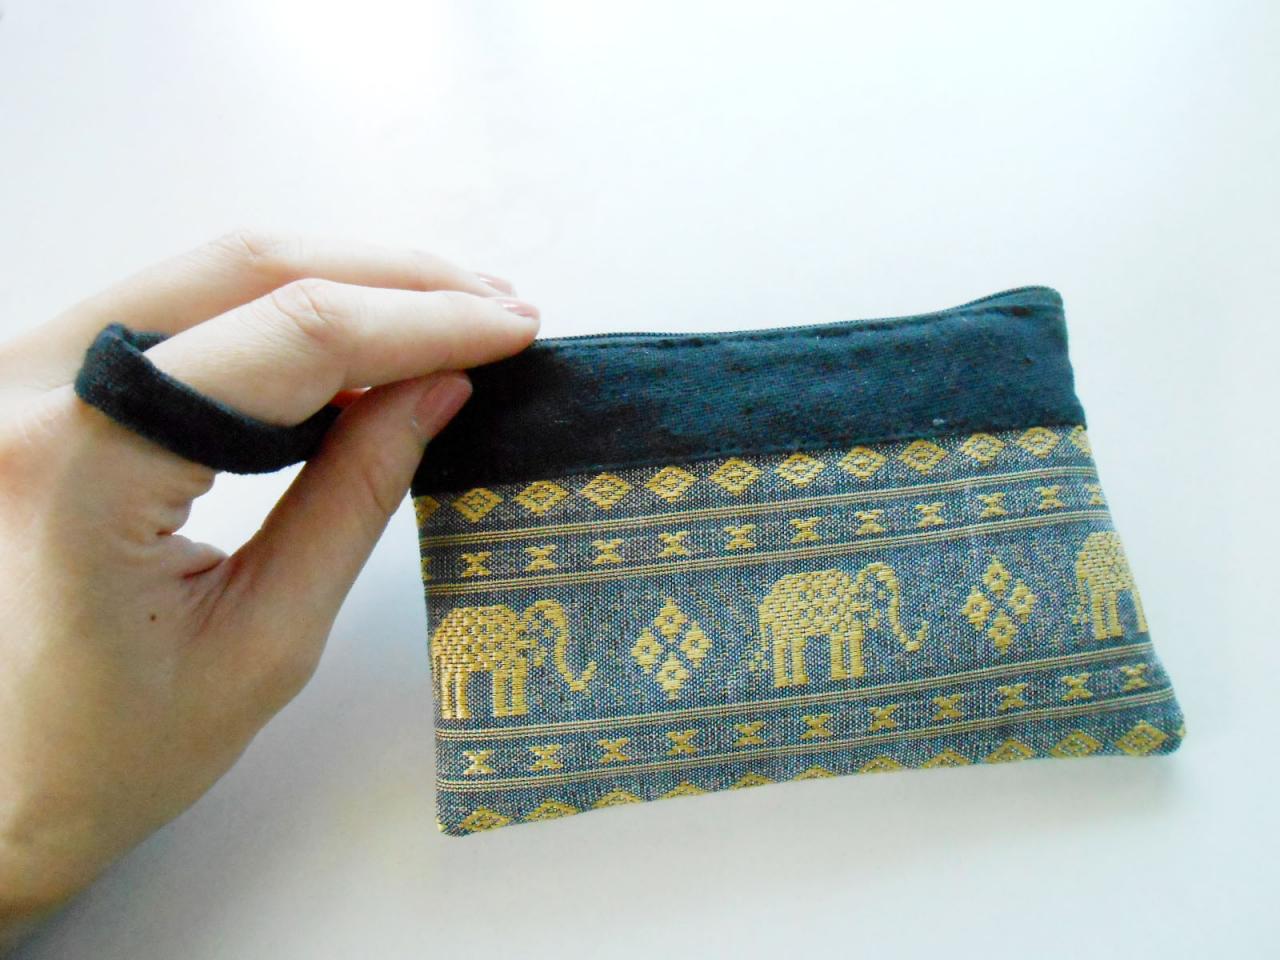 Zipper Coin Pouch Change Purse - Elephant - Small Bag, Embroidery Fabric Thailand Handmade (kp1005-gy)